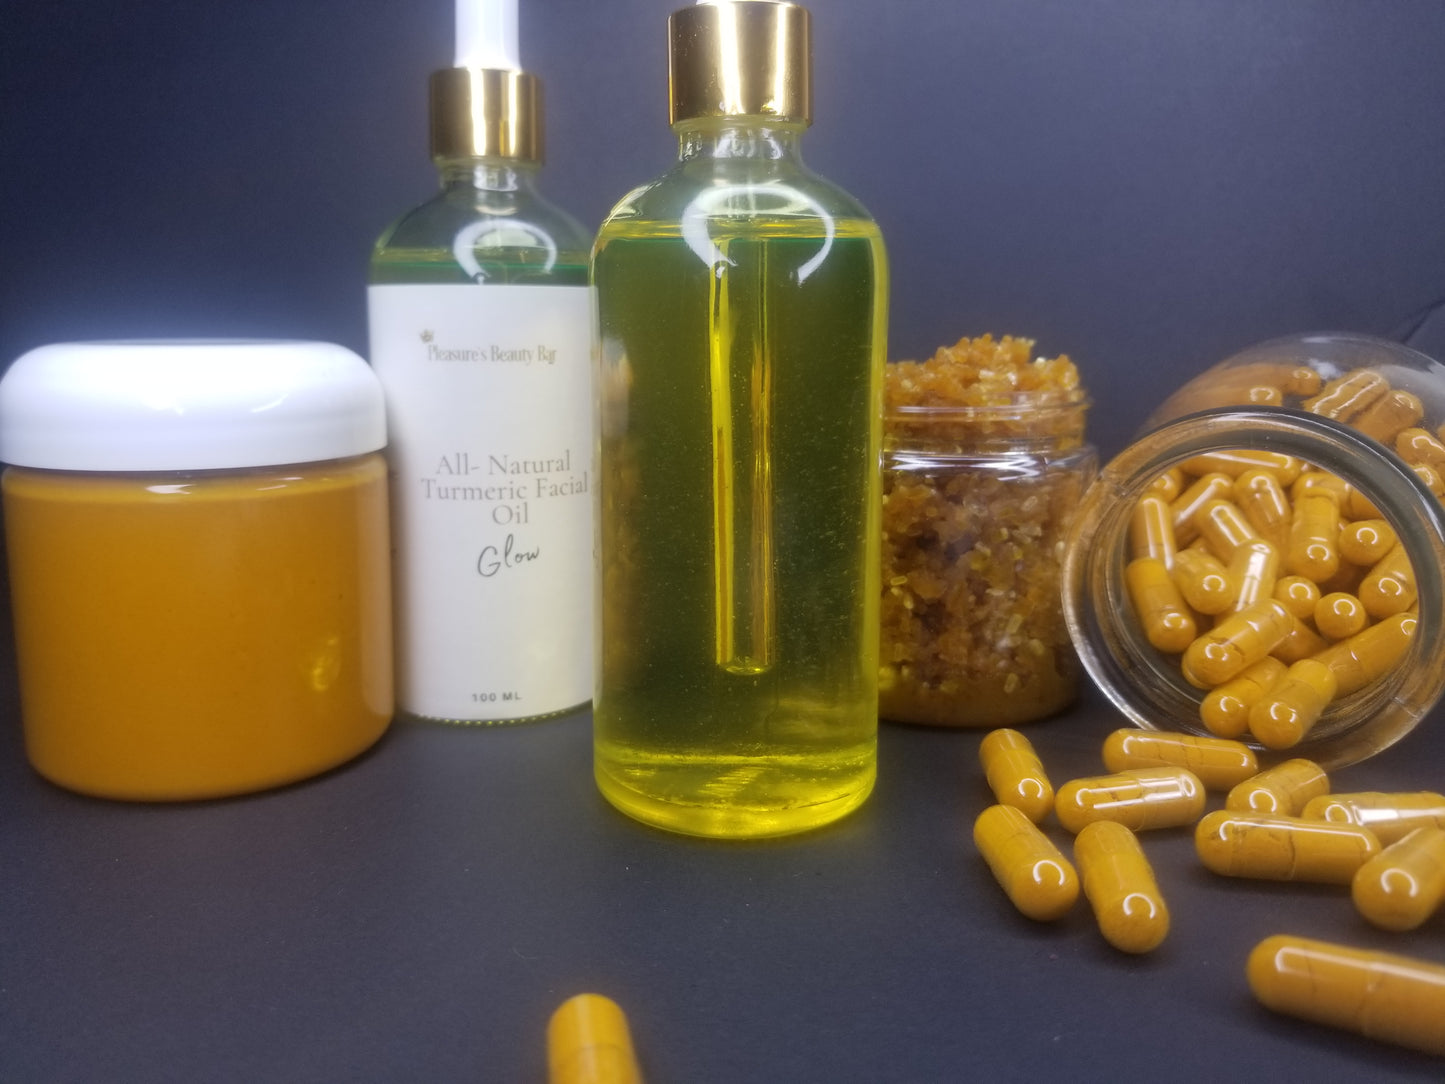 All-Natural Turmeric Body Collection